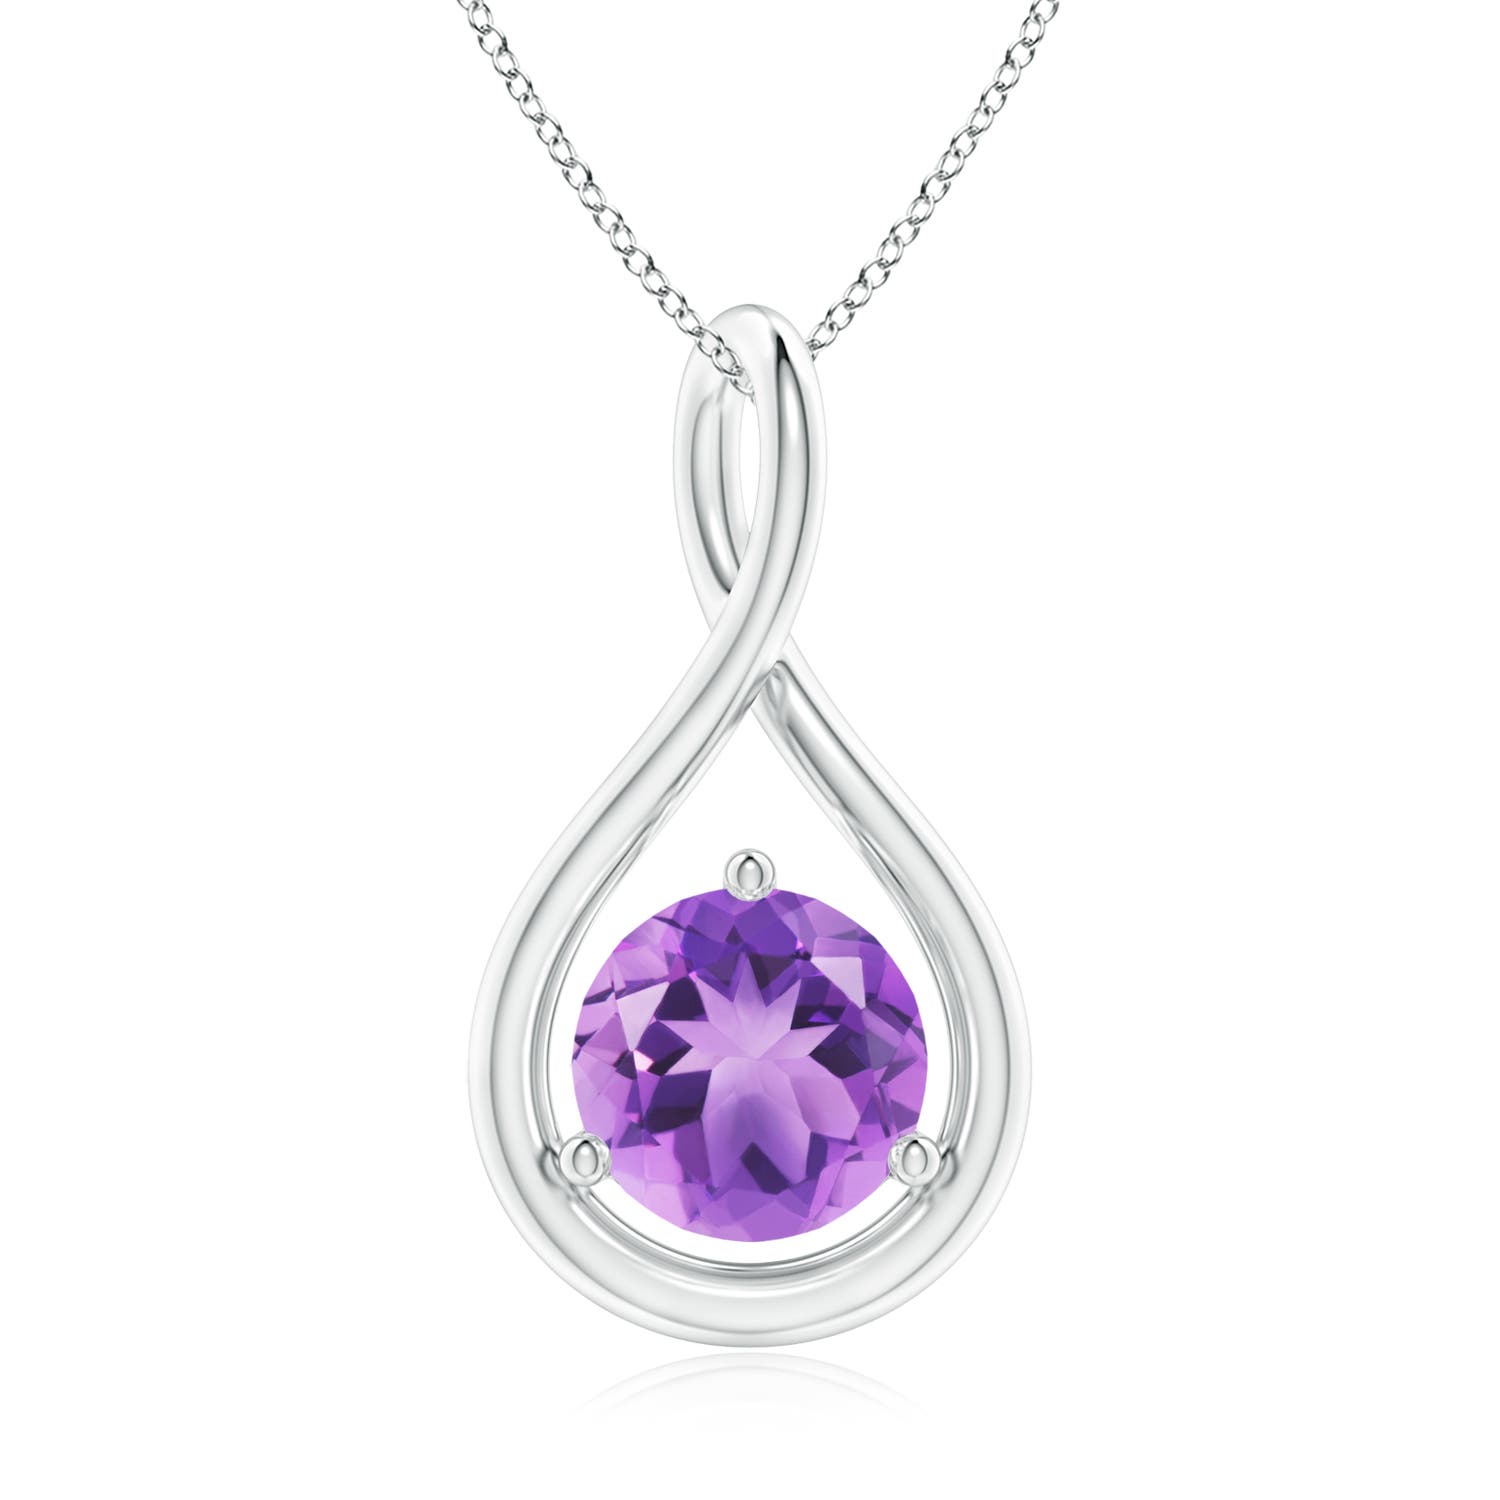 A - Amethyst / 1.15 CT / 14 KT White Gold